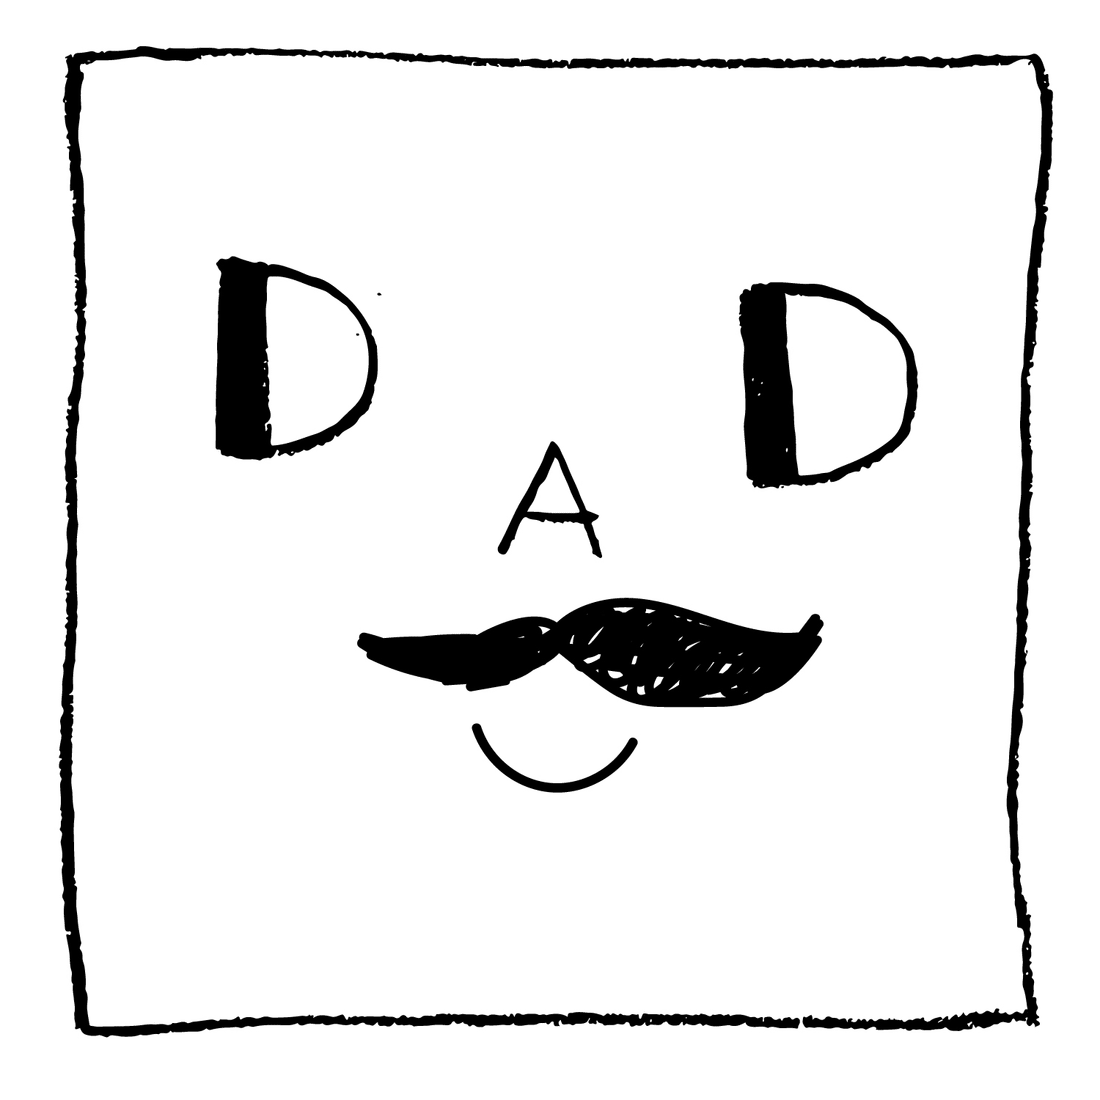 Dad you make me smile - Father's Day Card Freebies Wee Gallery   